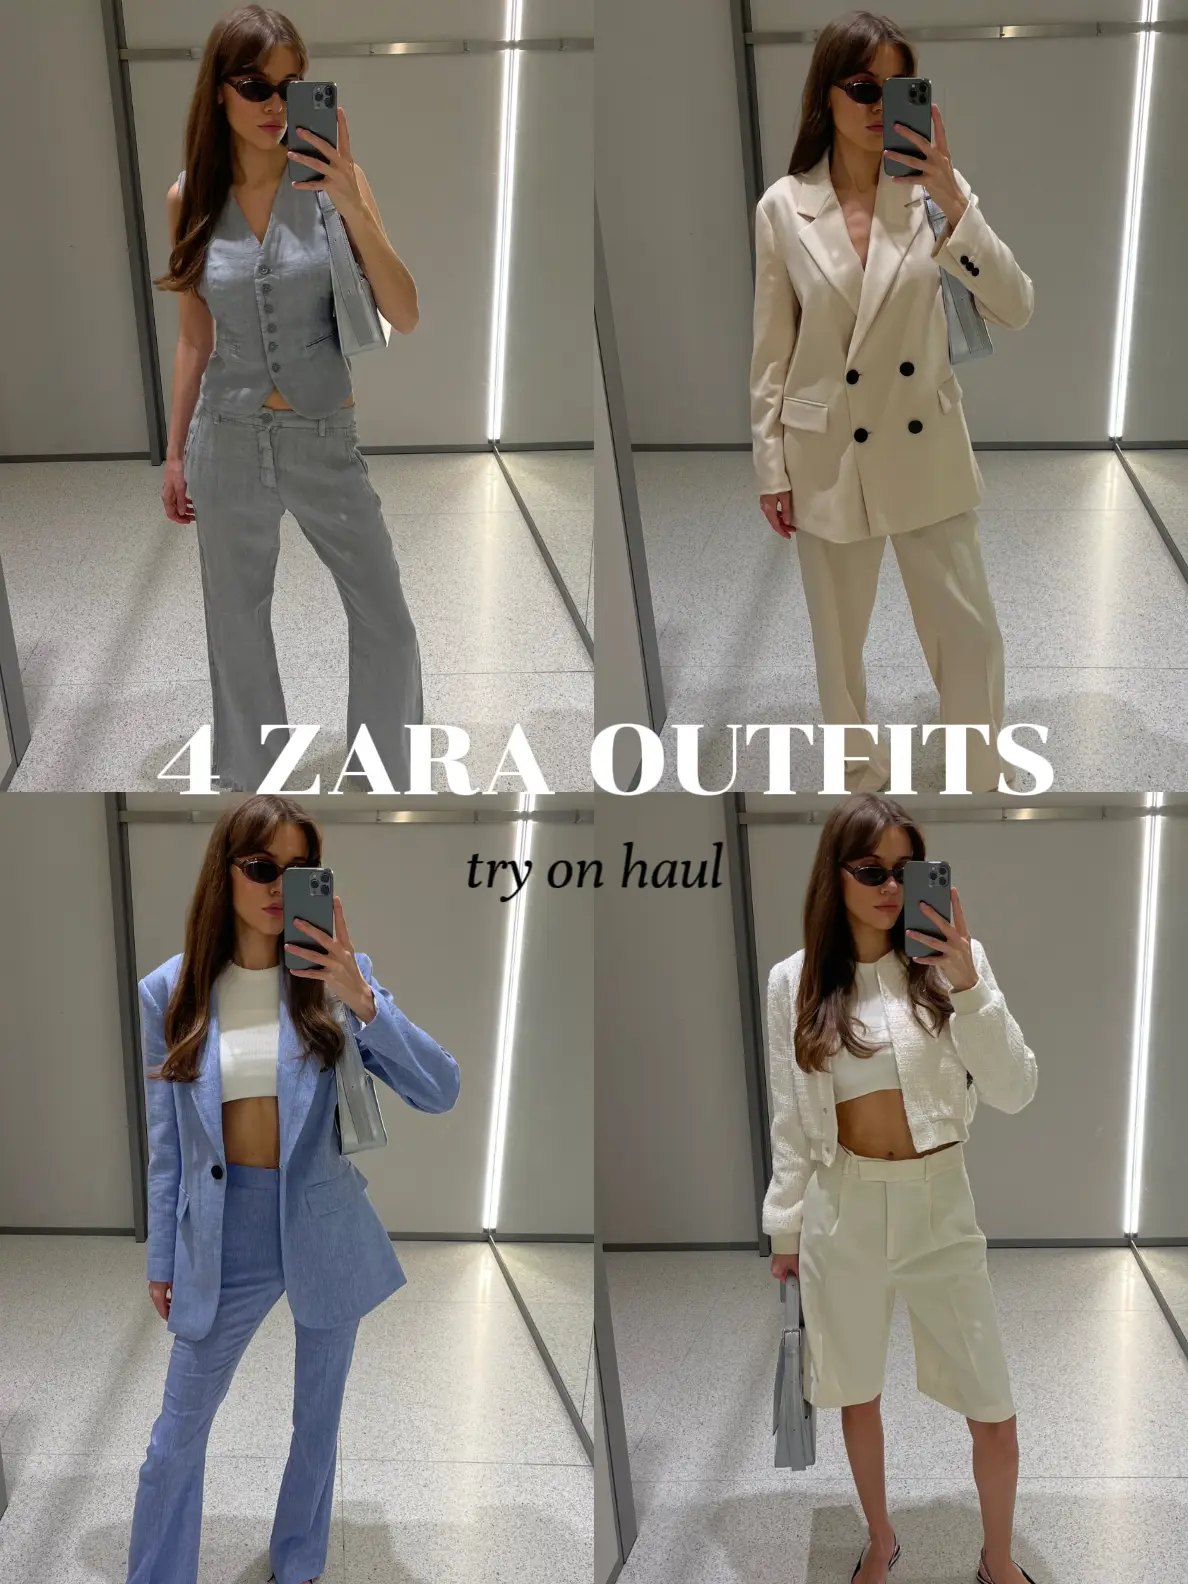 4 ZARA OUTFITS with codes, Gallery posted by Kristine